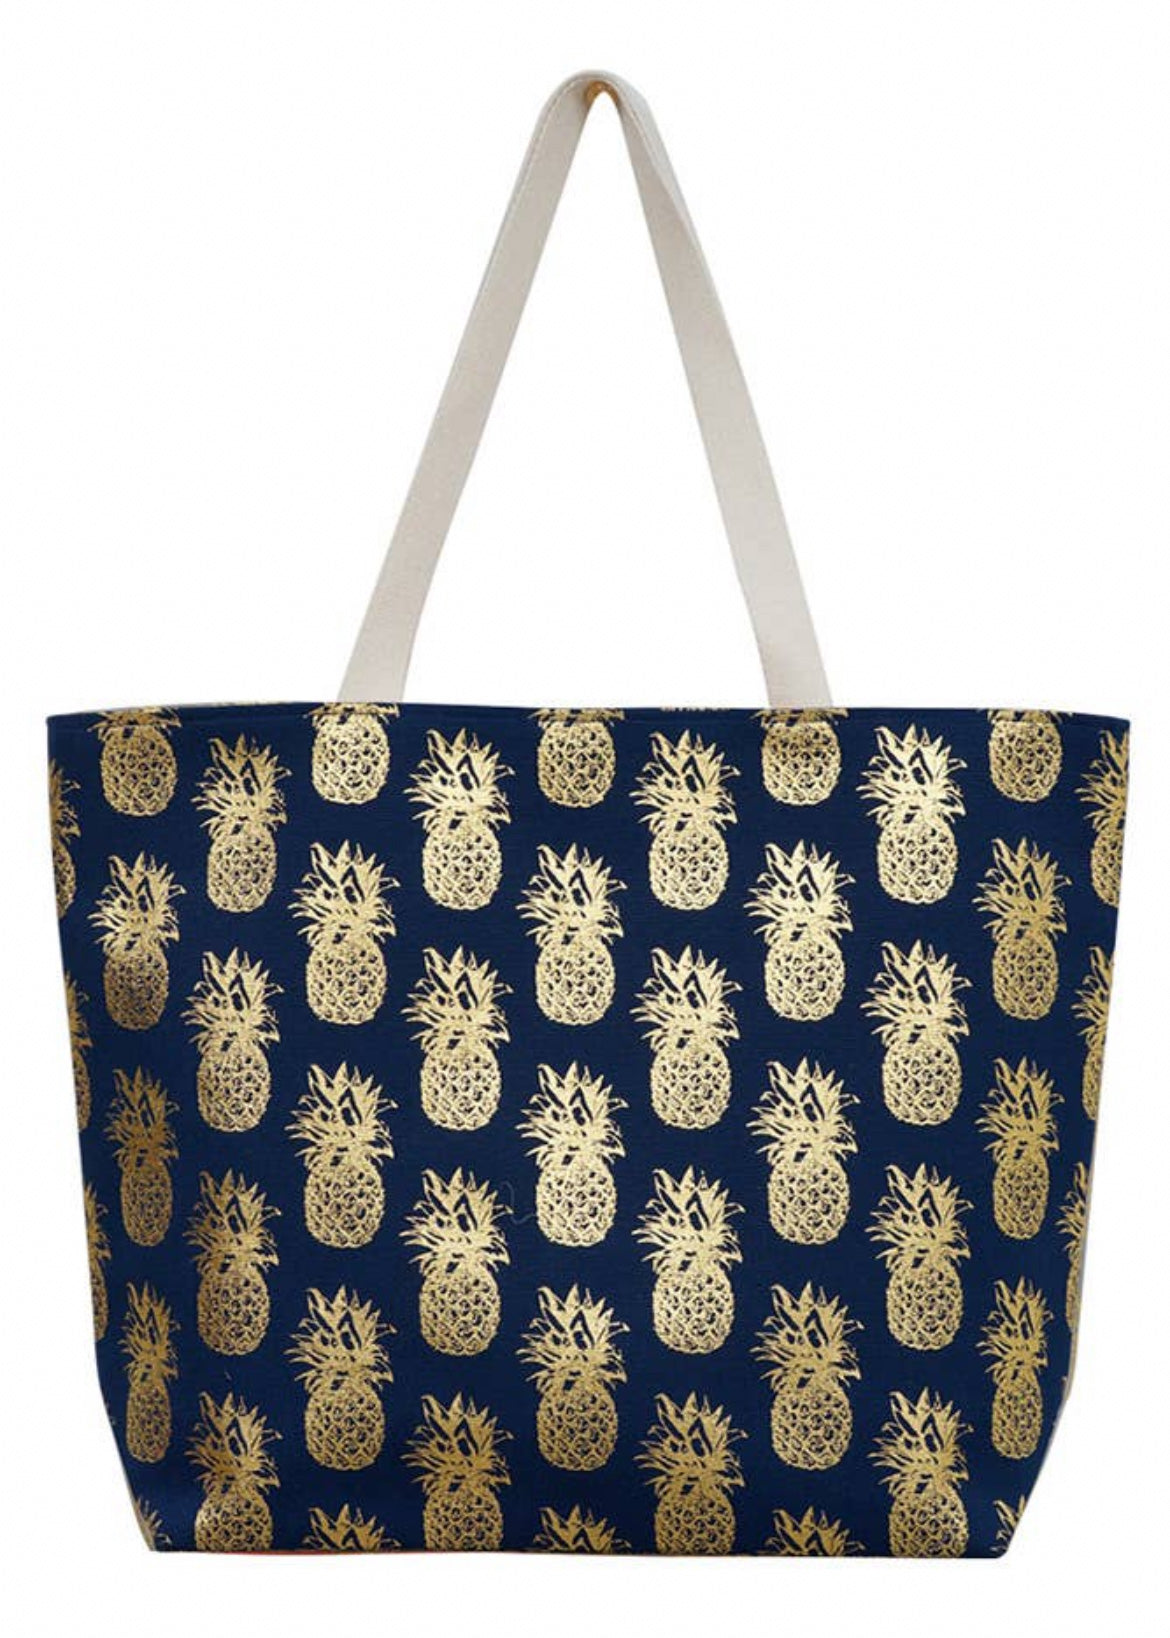 Navy beach bag with gold foil tropical pineapples  imprinted  throughout.  Bag has a snap closure and long straps. 